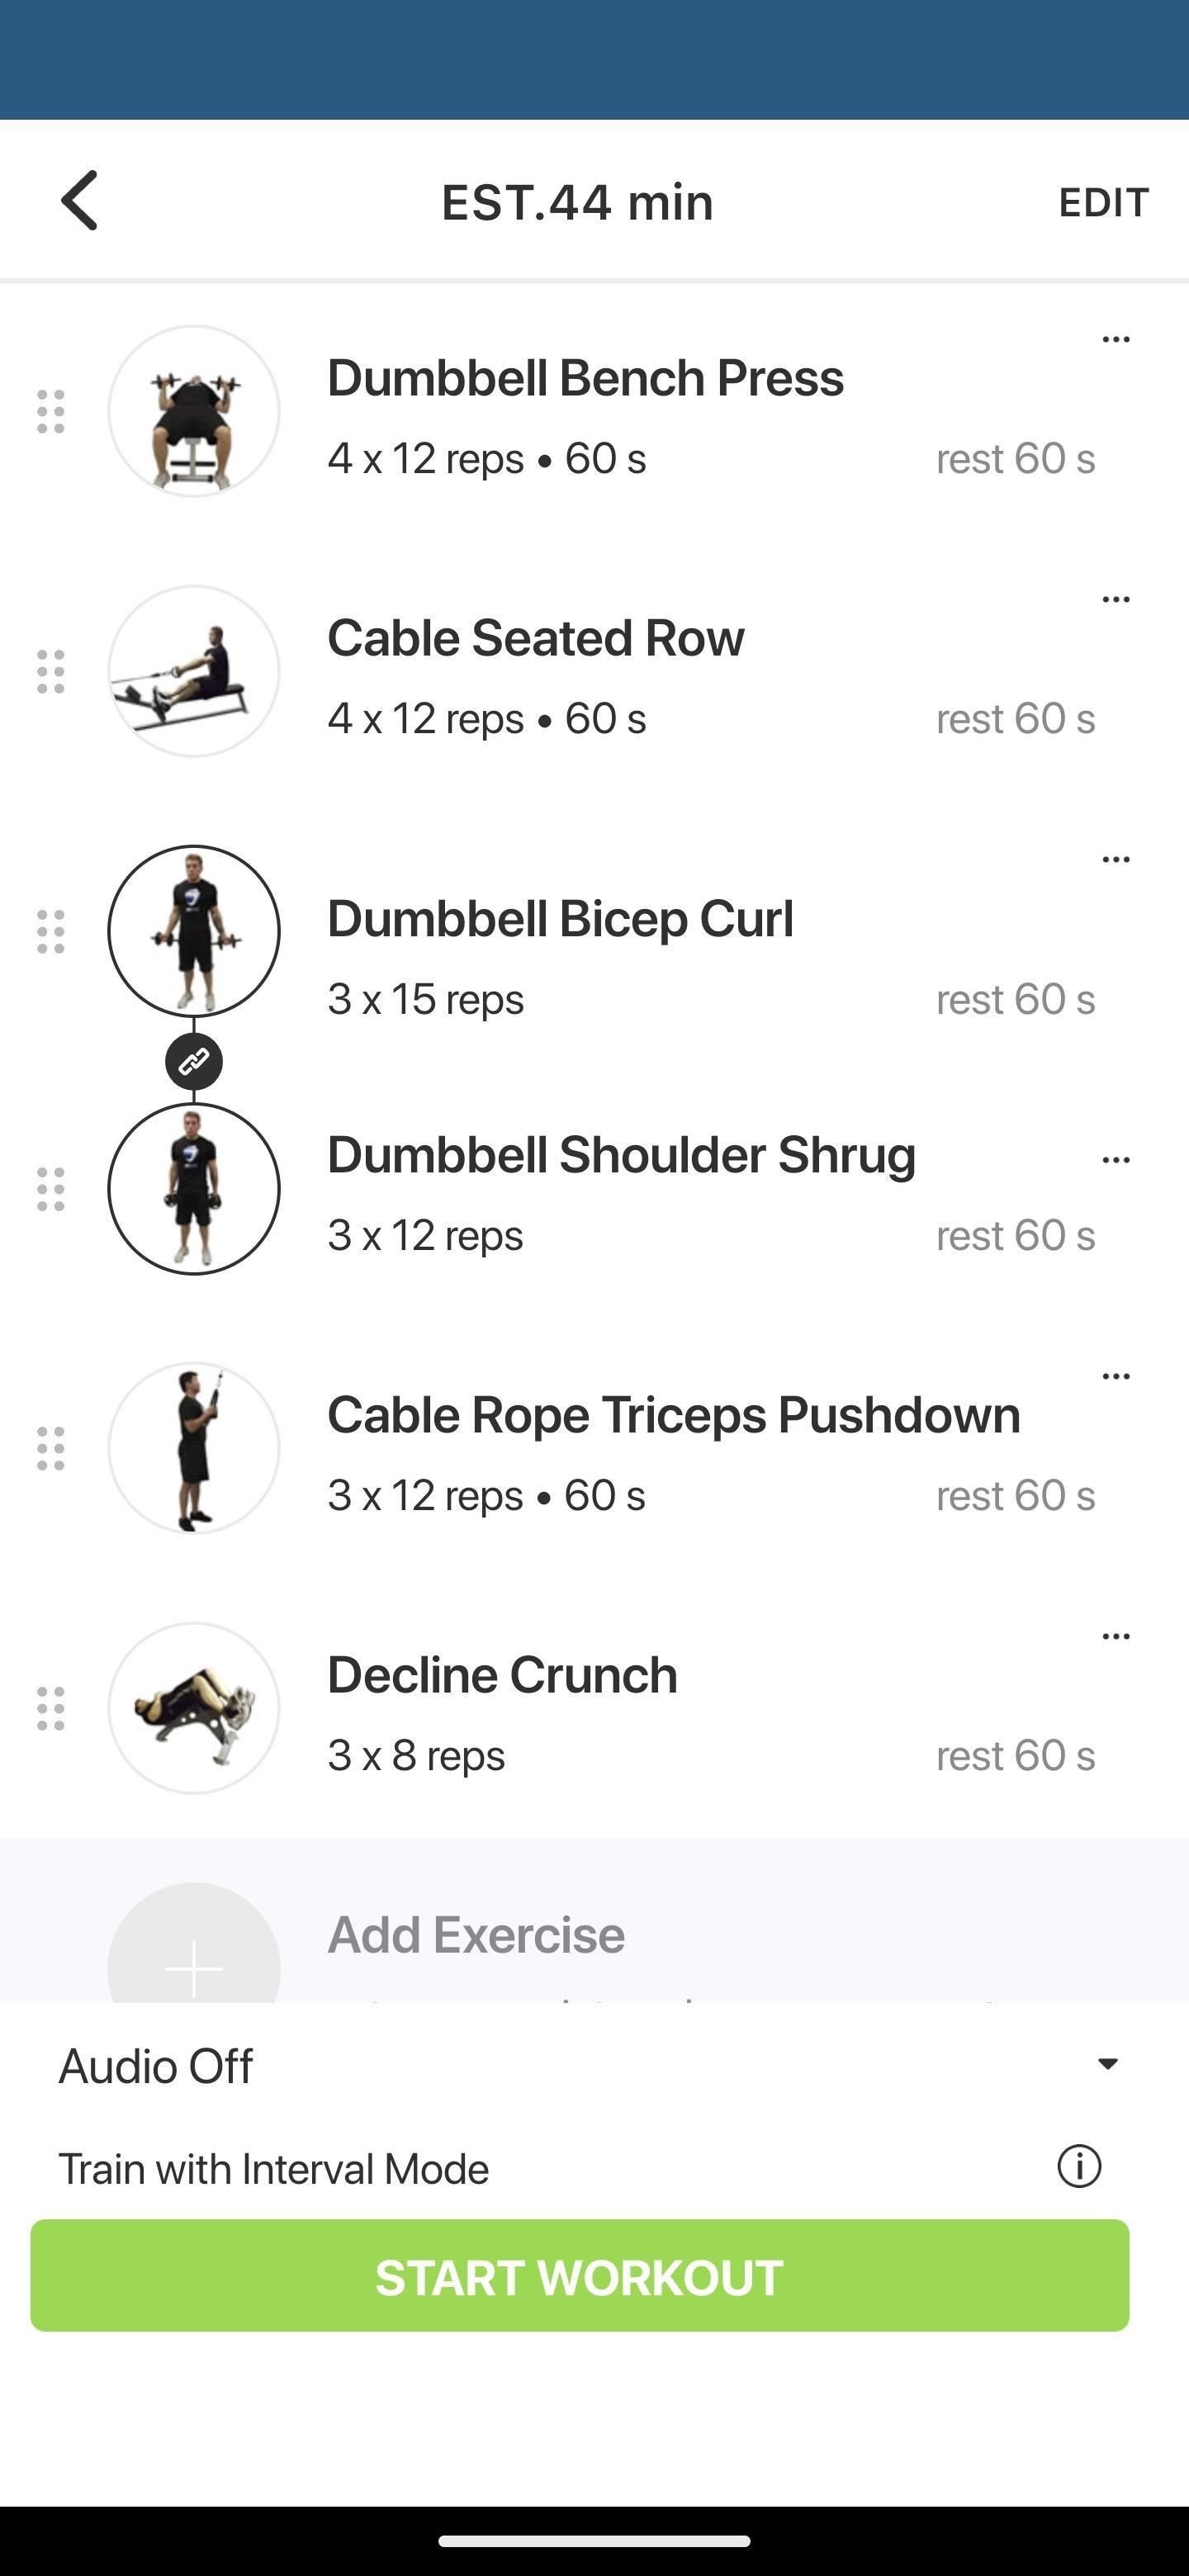 Turn your iPhone or Android smartphone into a personal trainer to lose weight or get in shape